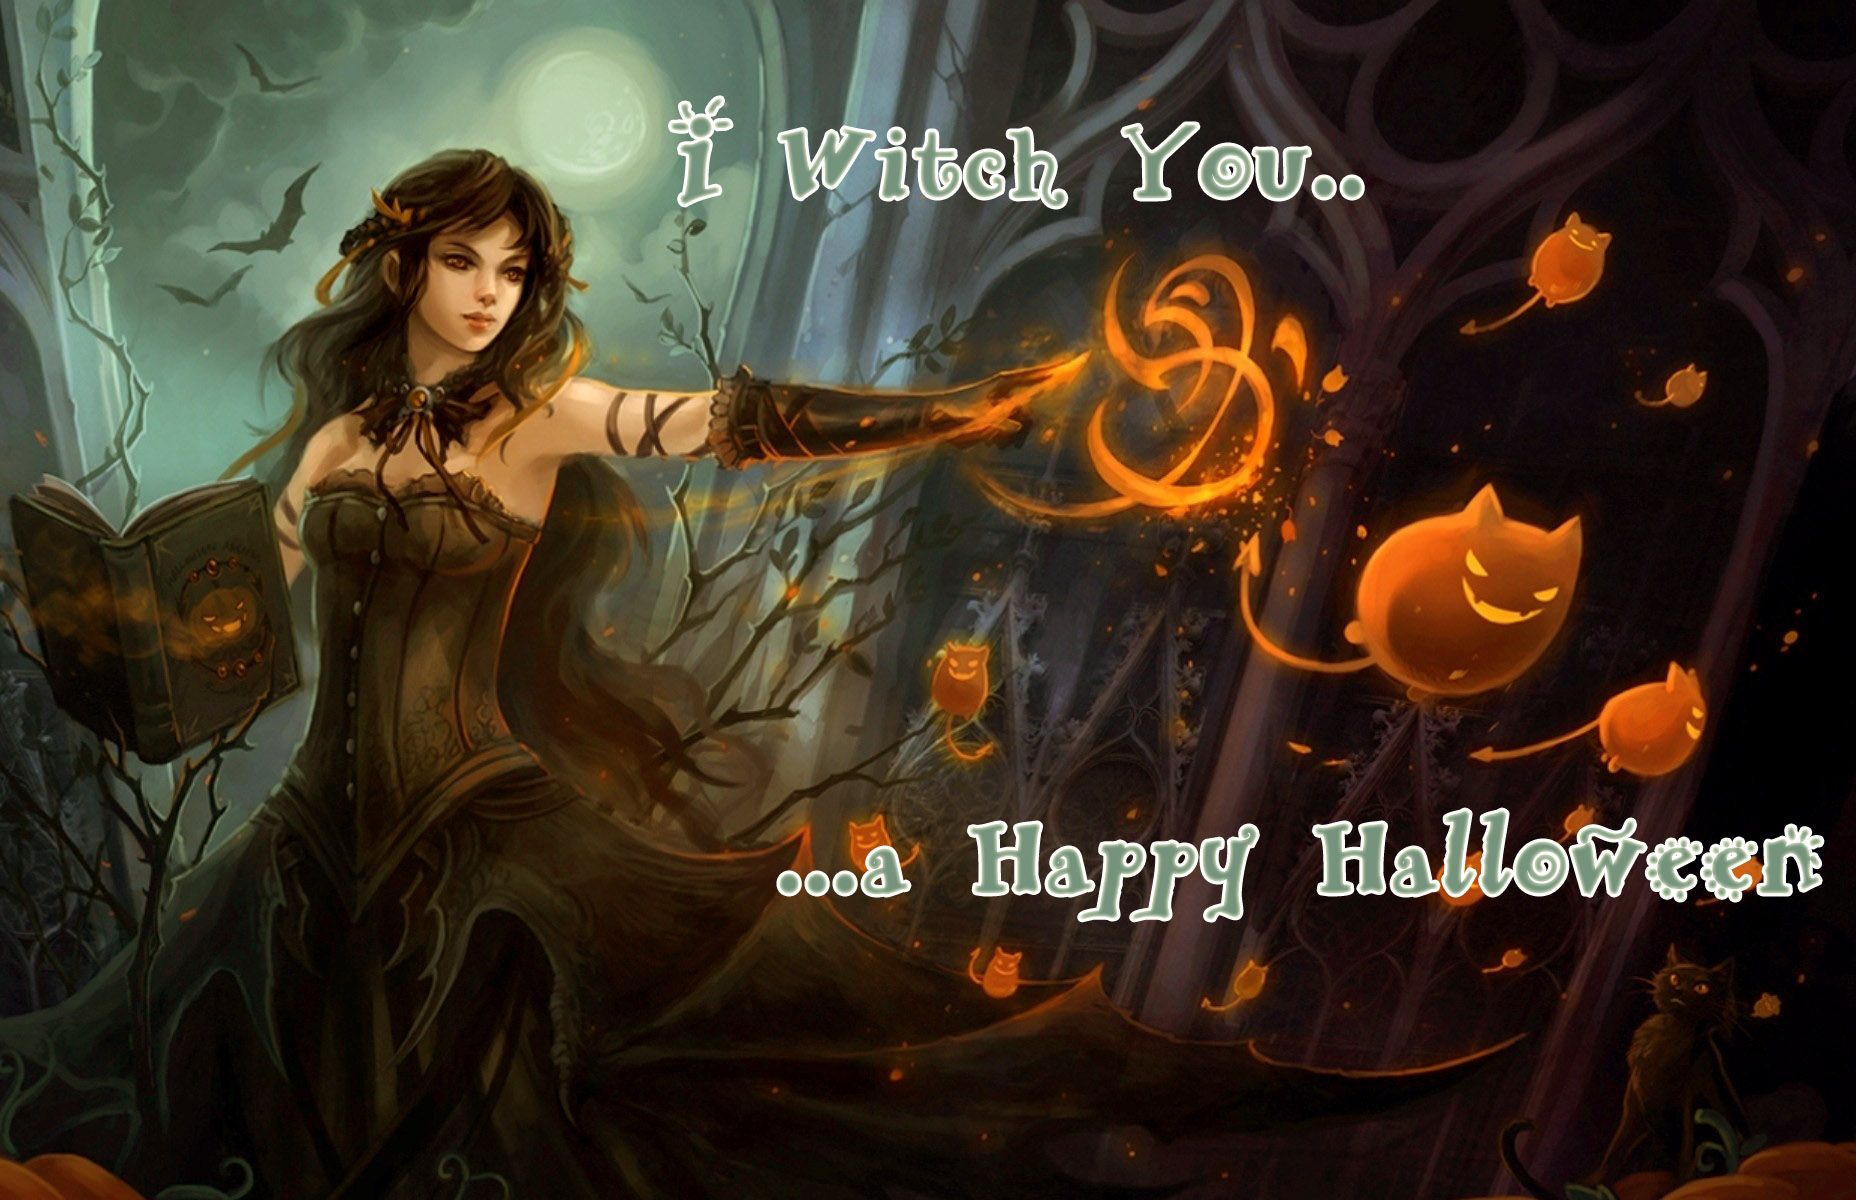 Halloween Greeting Invitation Cards, Hot, Spooky, Freaky Wallpaper